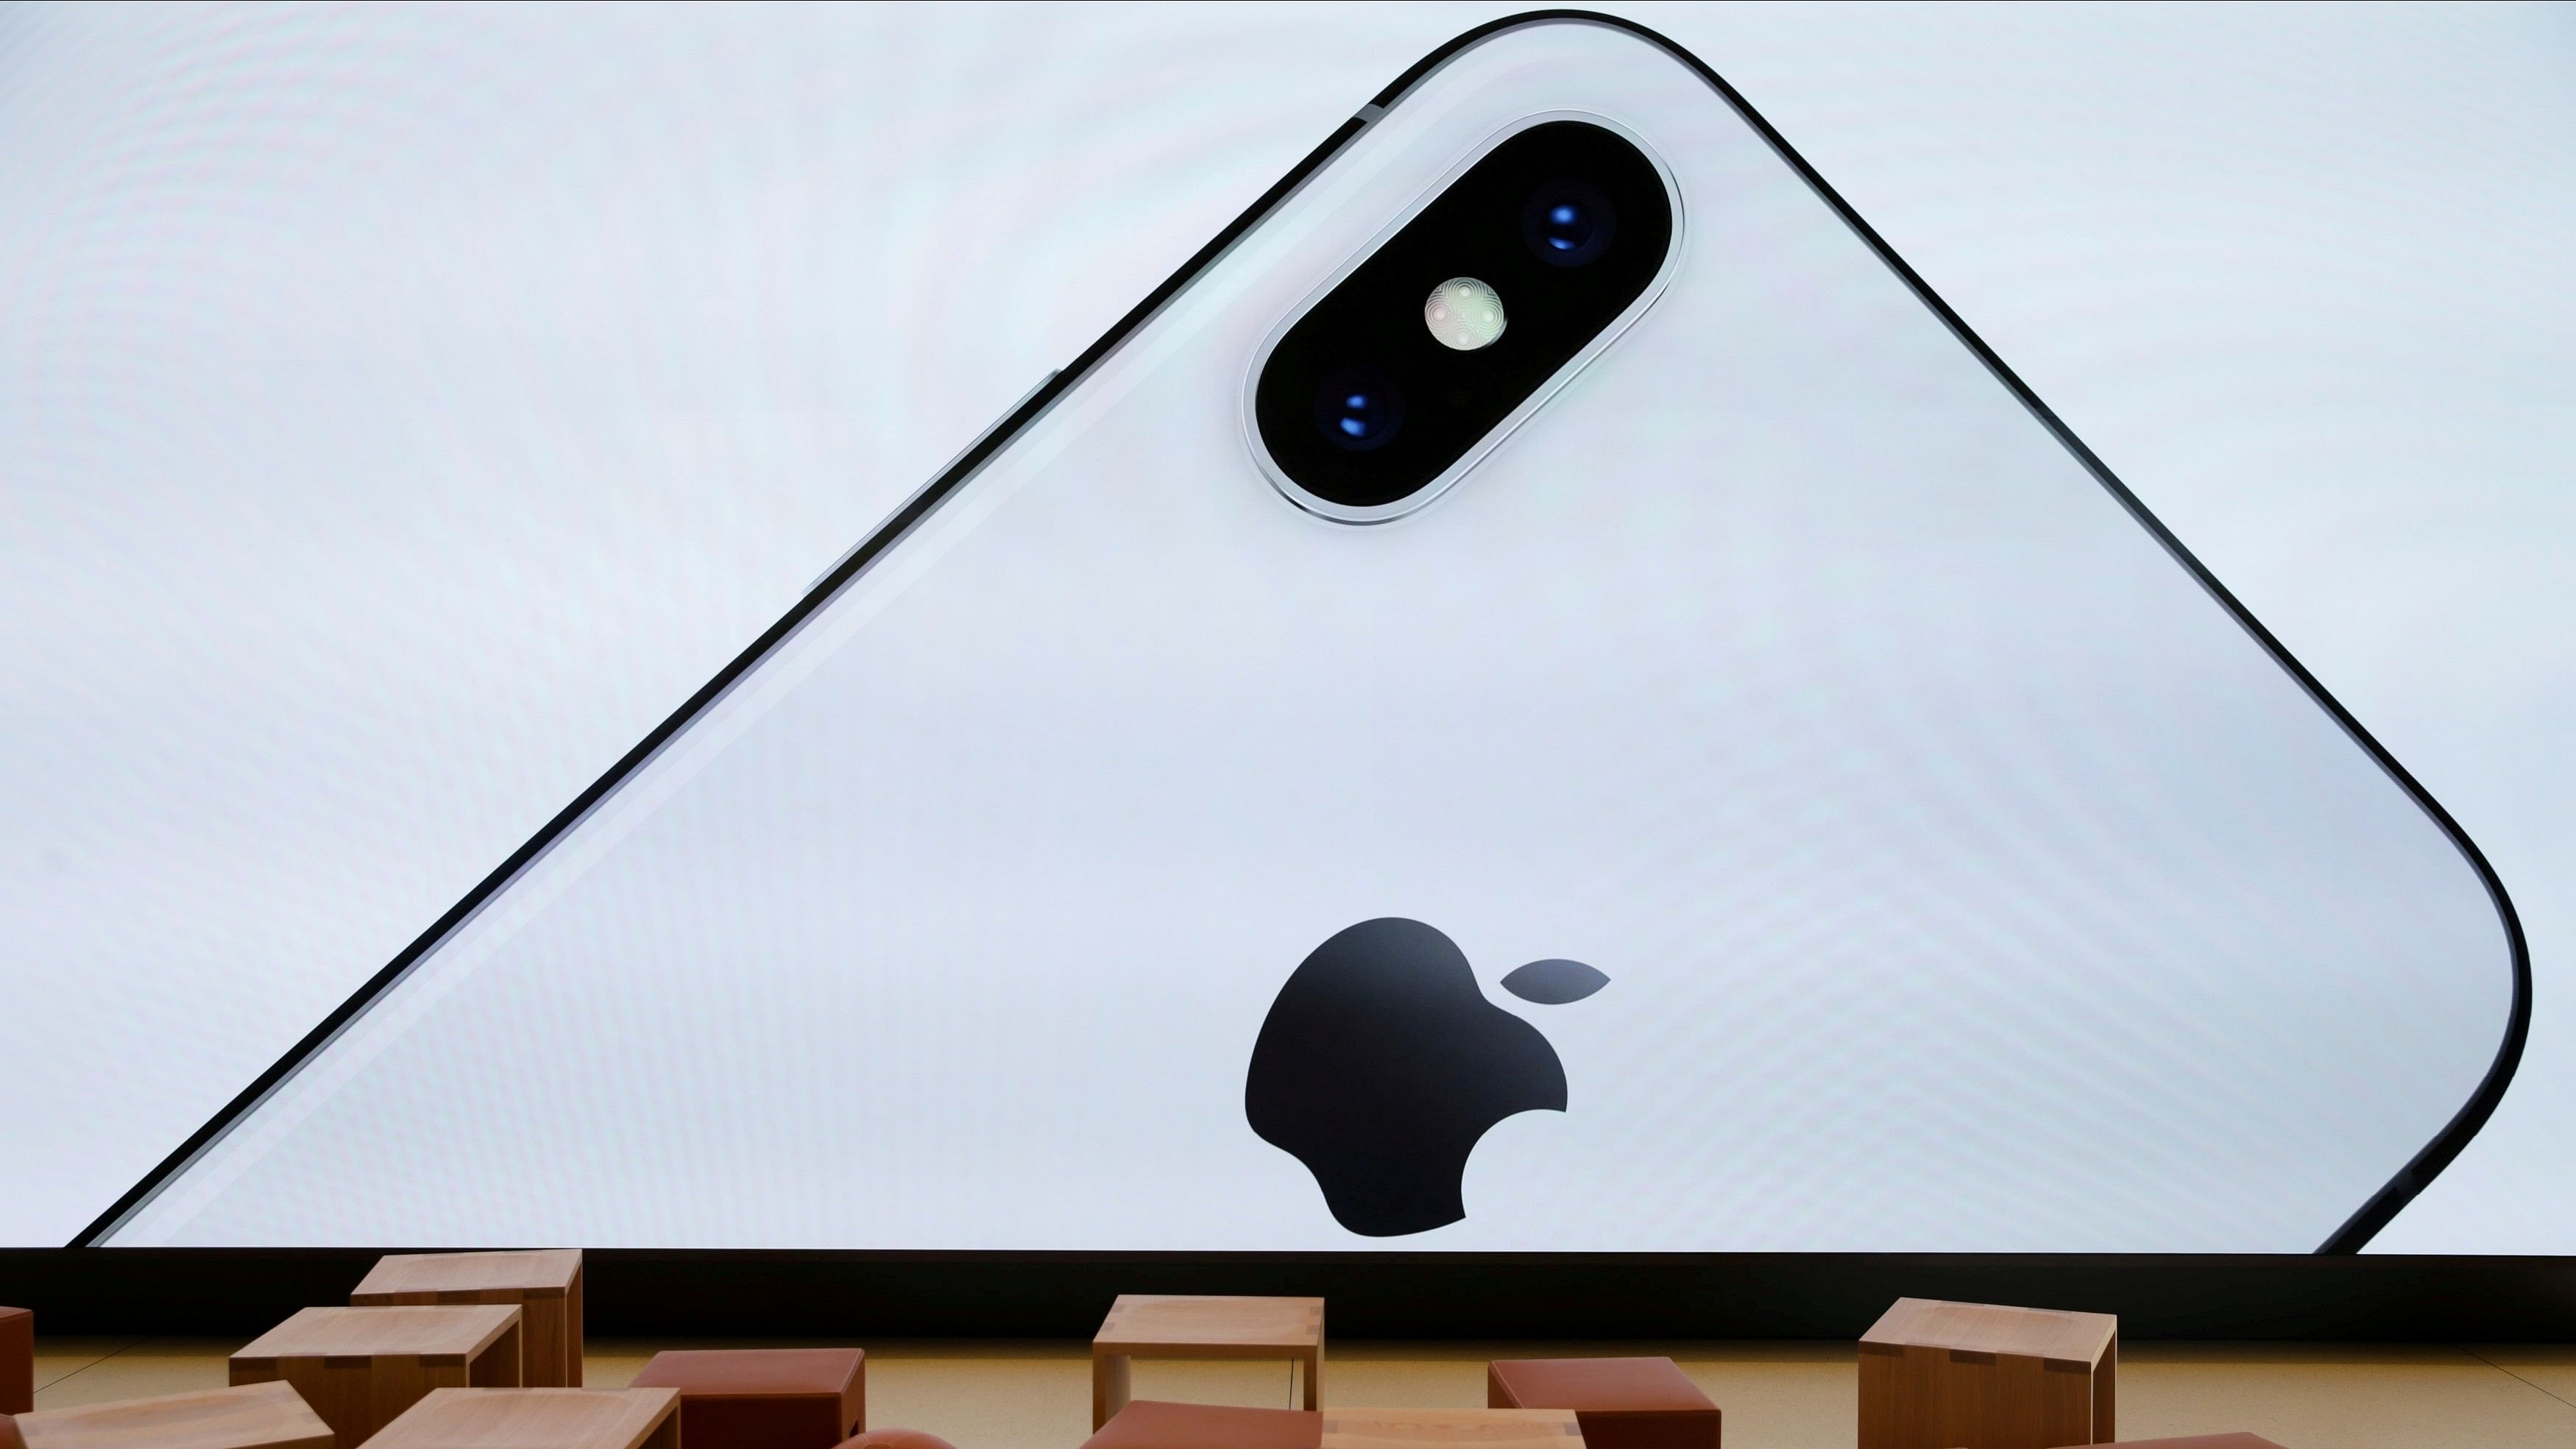 <div class="paragraphs"><p>[Representational Image] An iPhone X is seen on a large video screen in the new Apple Visitor Center in Cupertino FILE PHOTO: An iPhone X is seen on a large video screen in the new Apple Visitor Center in Cupertino, California, U.S </p></div>